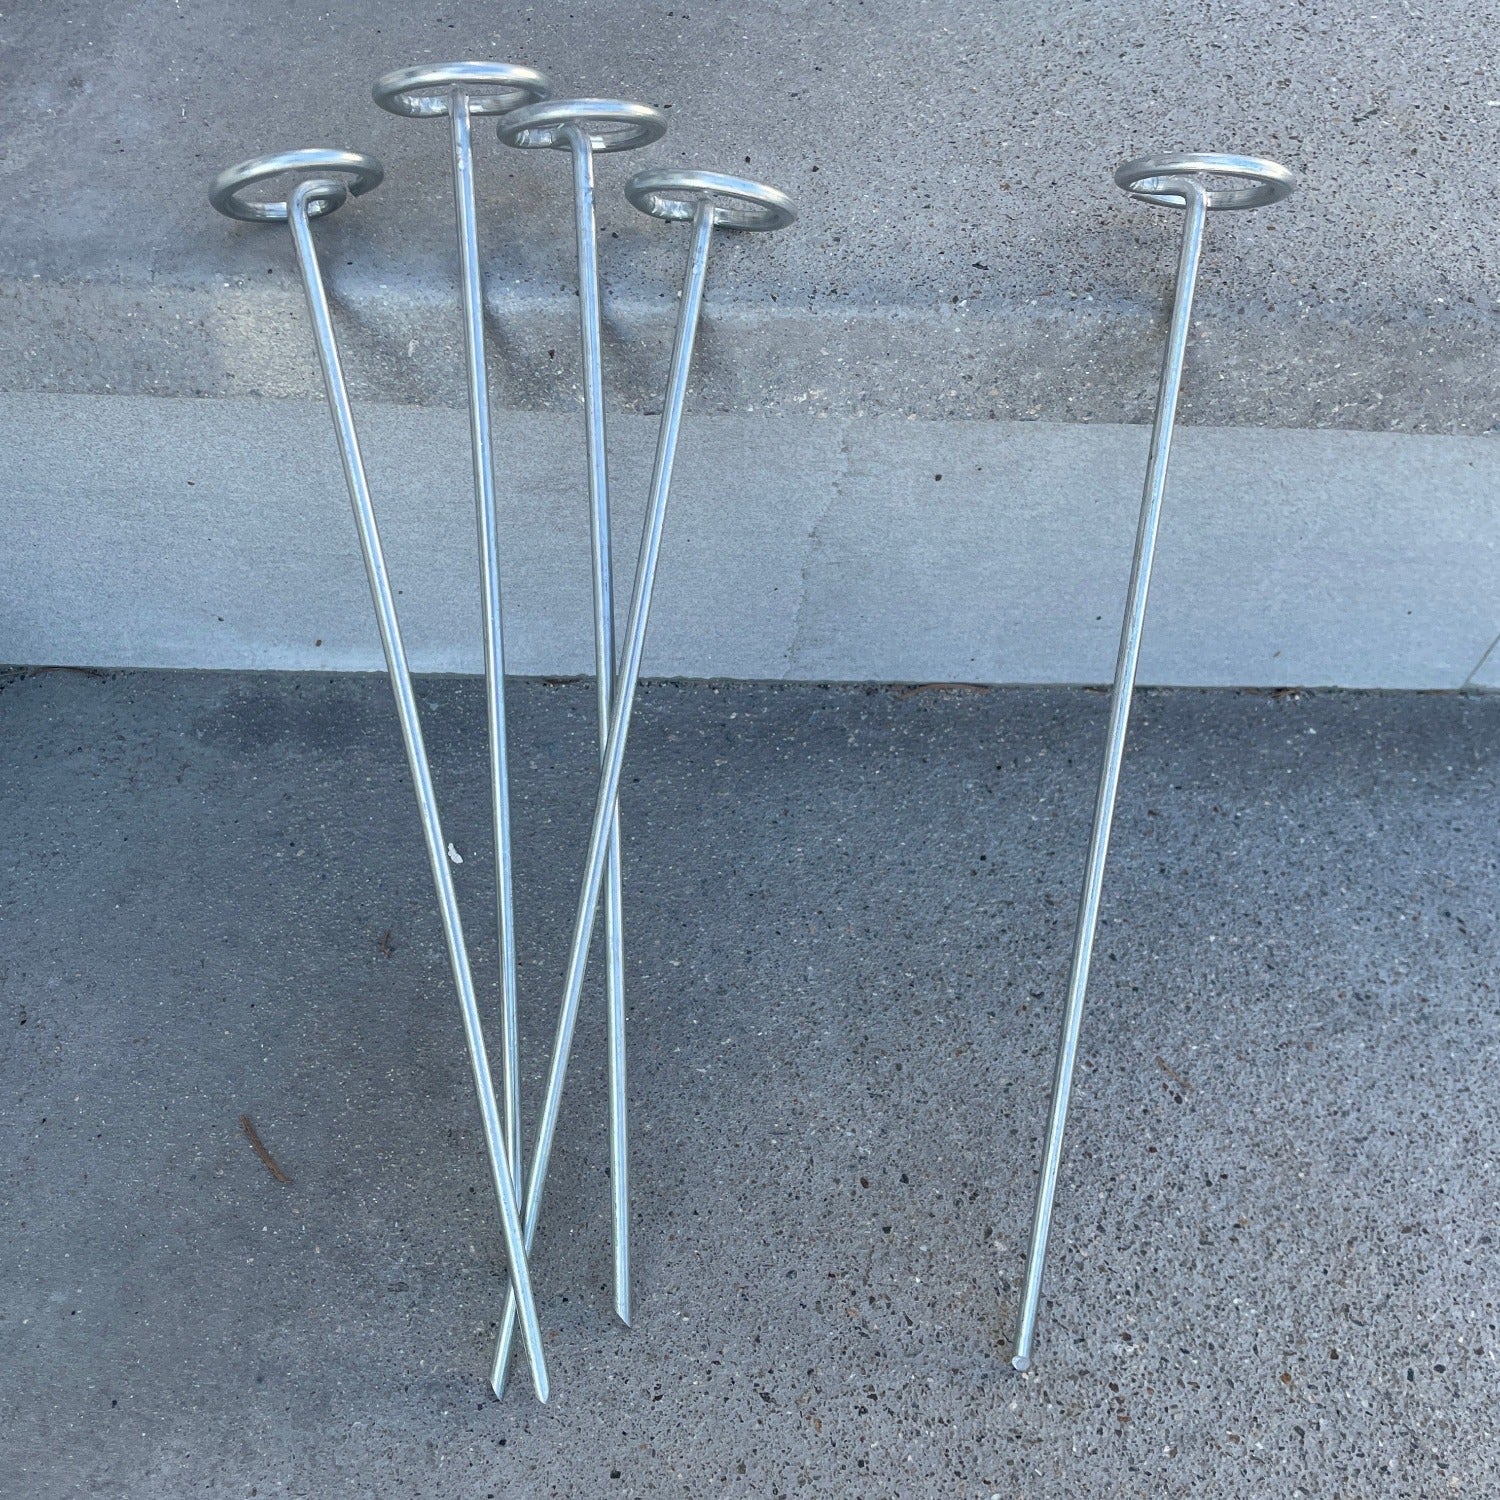 Circle Top Pins for Landscape Fabric & Weed Barrier - Sandbaggy